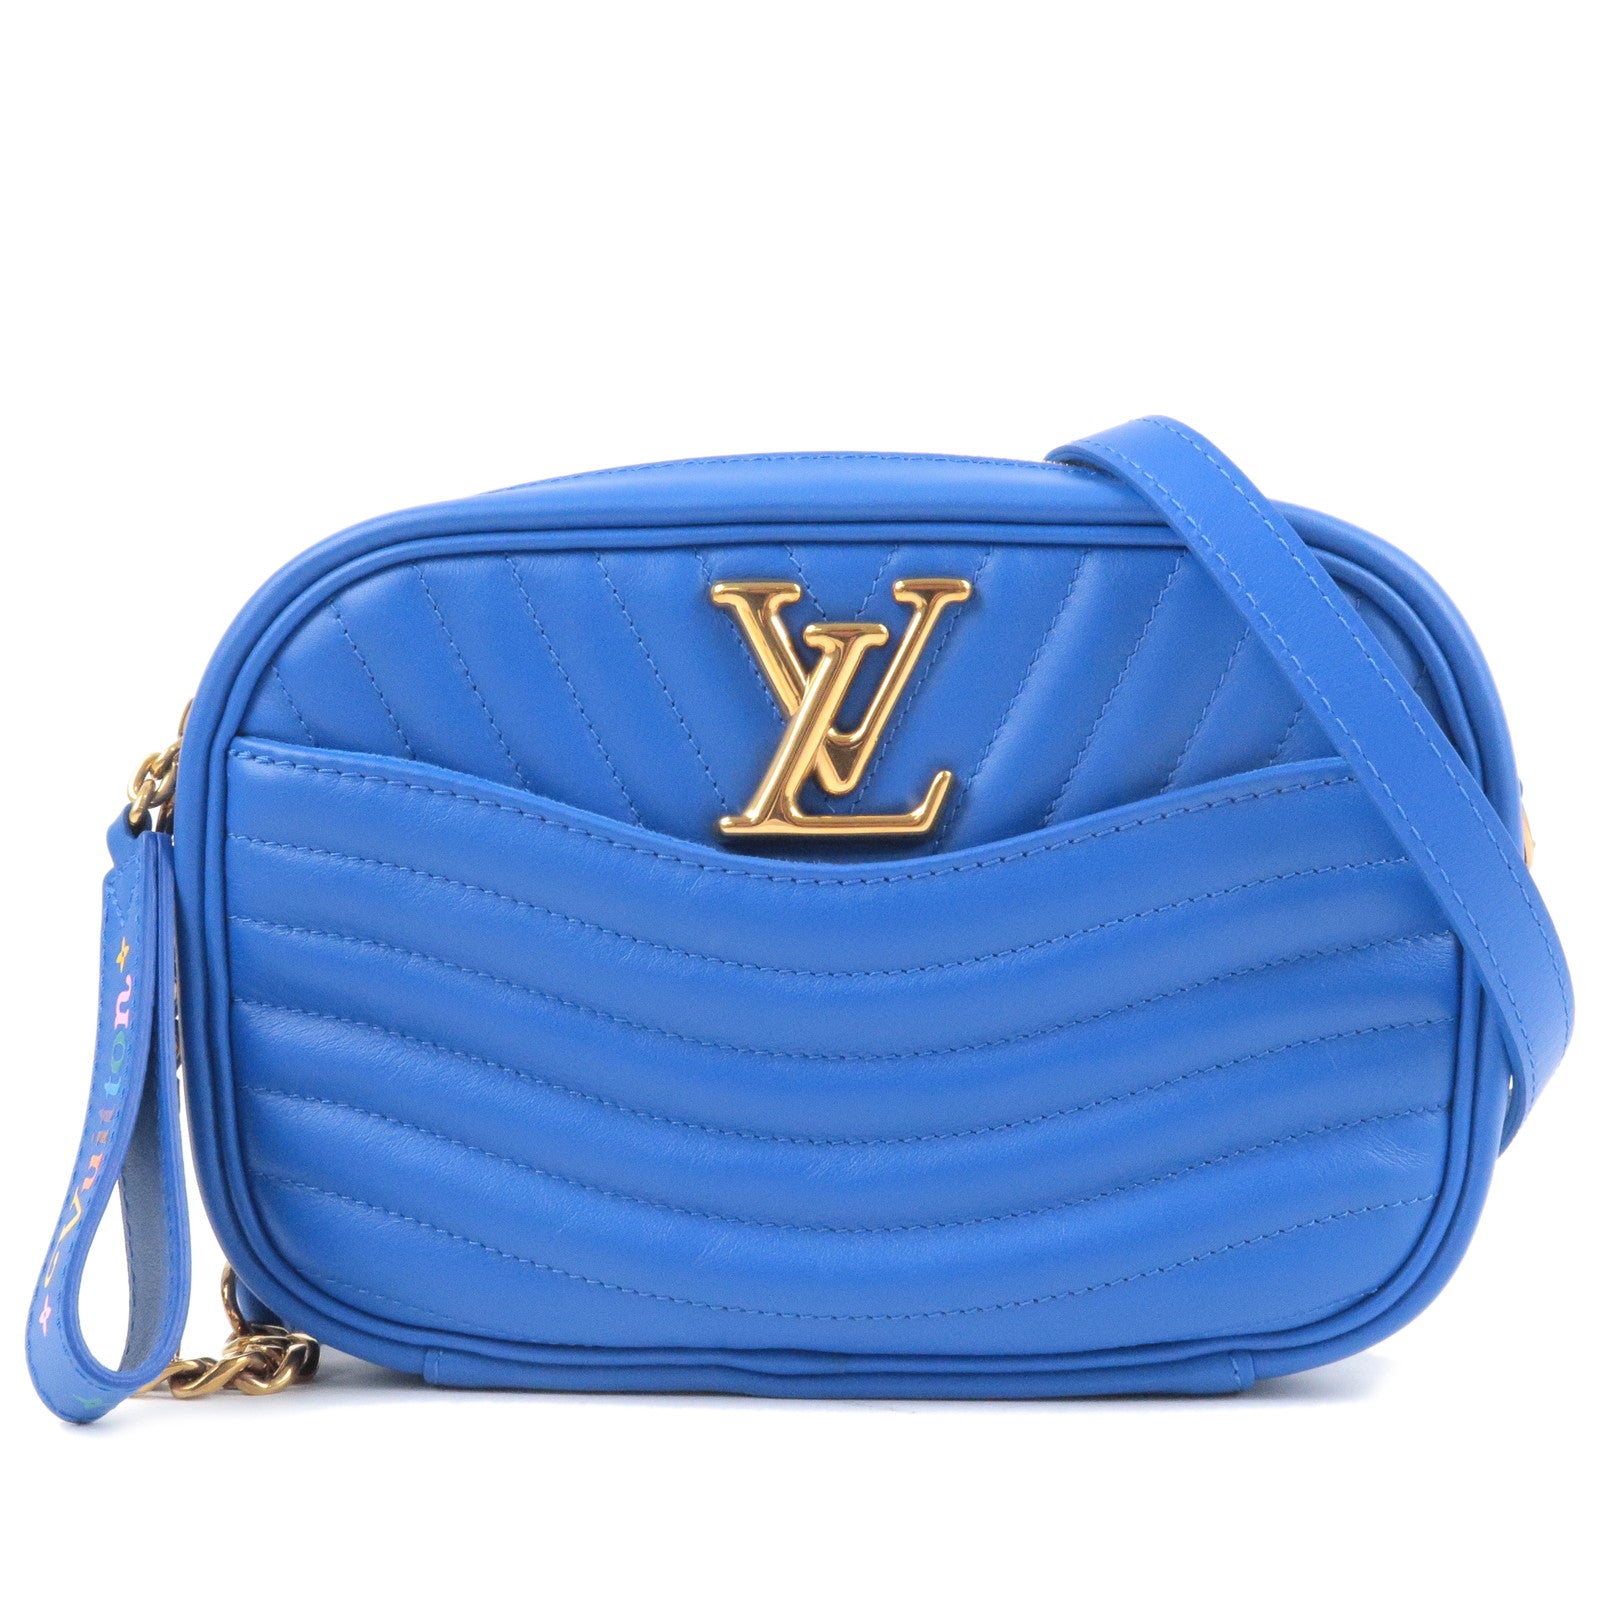 Louis Vuitton's New Wave Bag Is Now Available in Stores